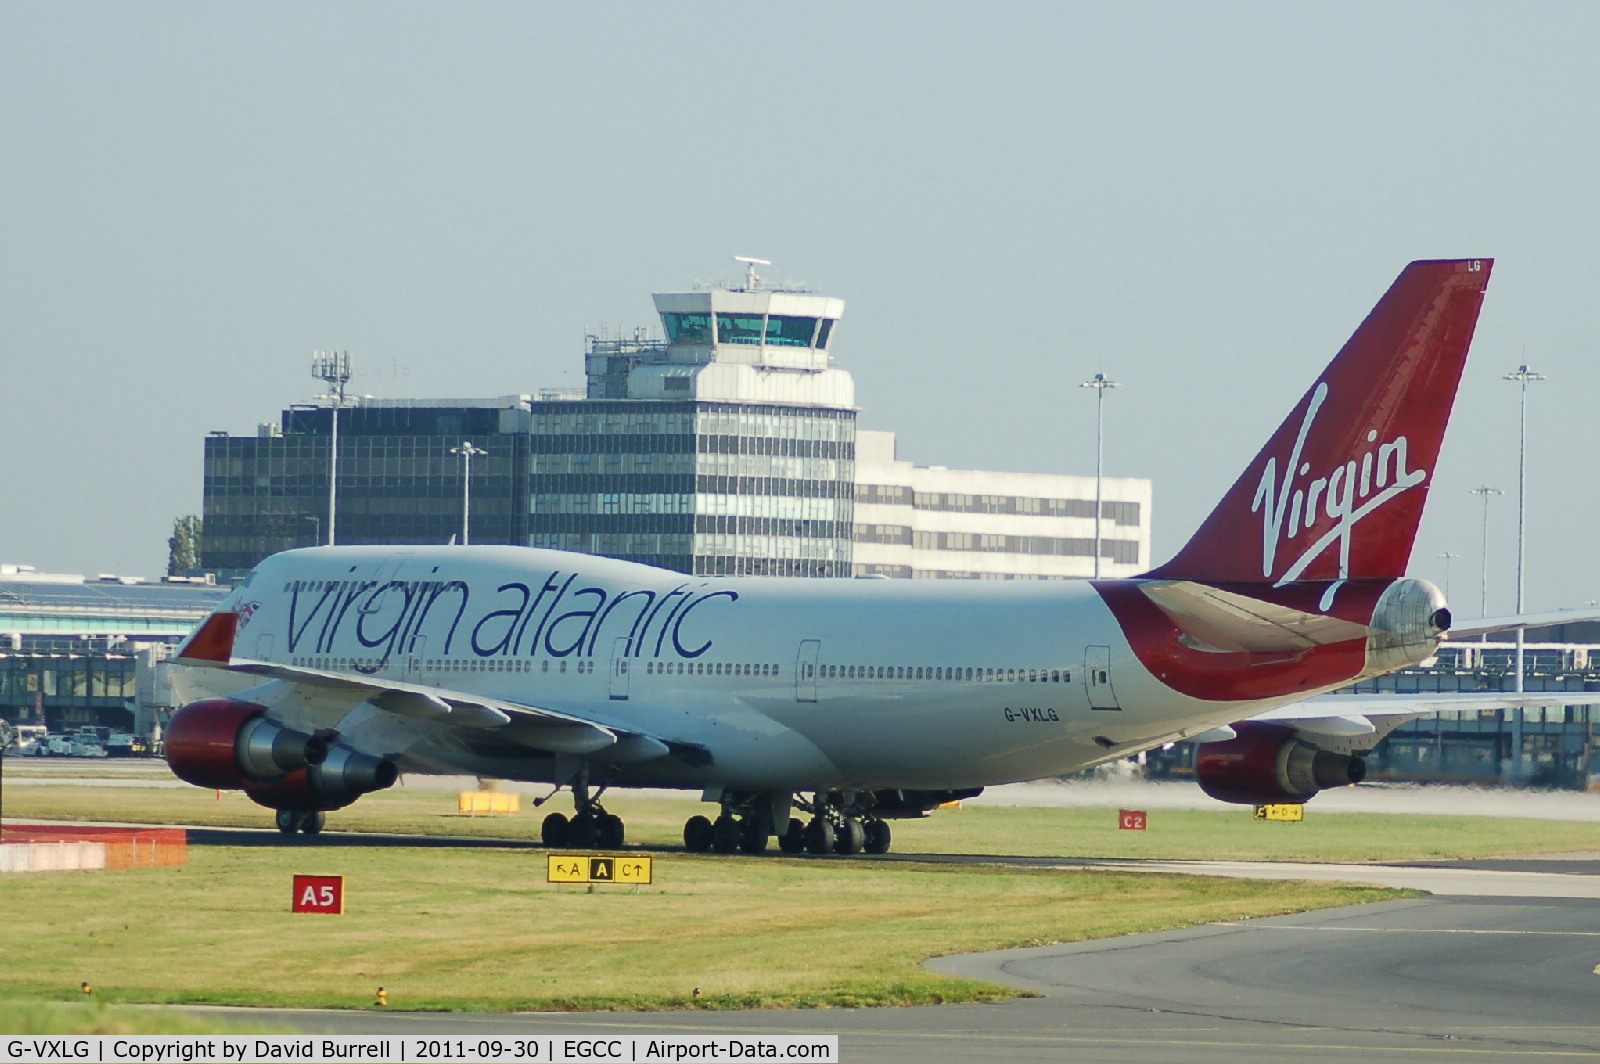 G-VXLG, 1998 Boeing 747-41R C/N 29406, Virgin Atlantic Boeing 747 taxiing at Manchester Airport.